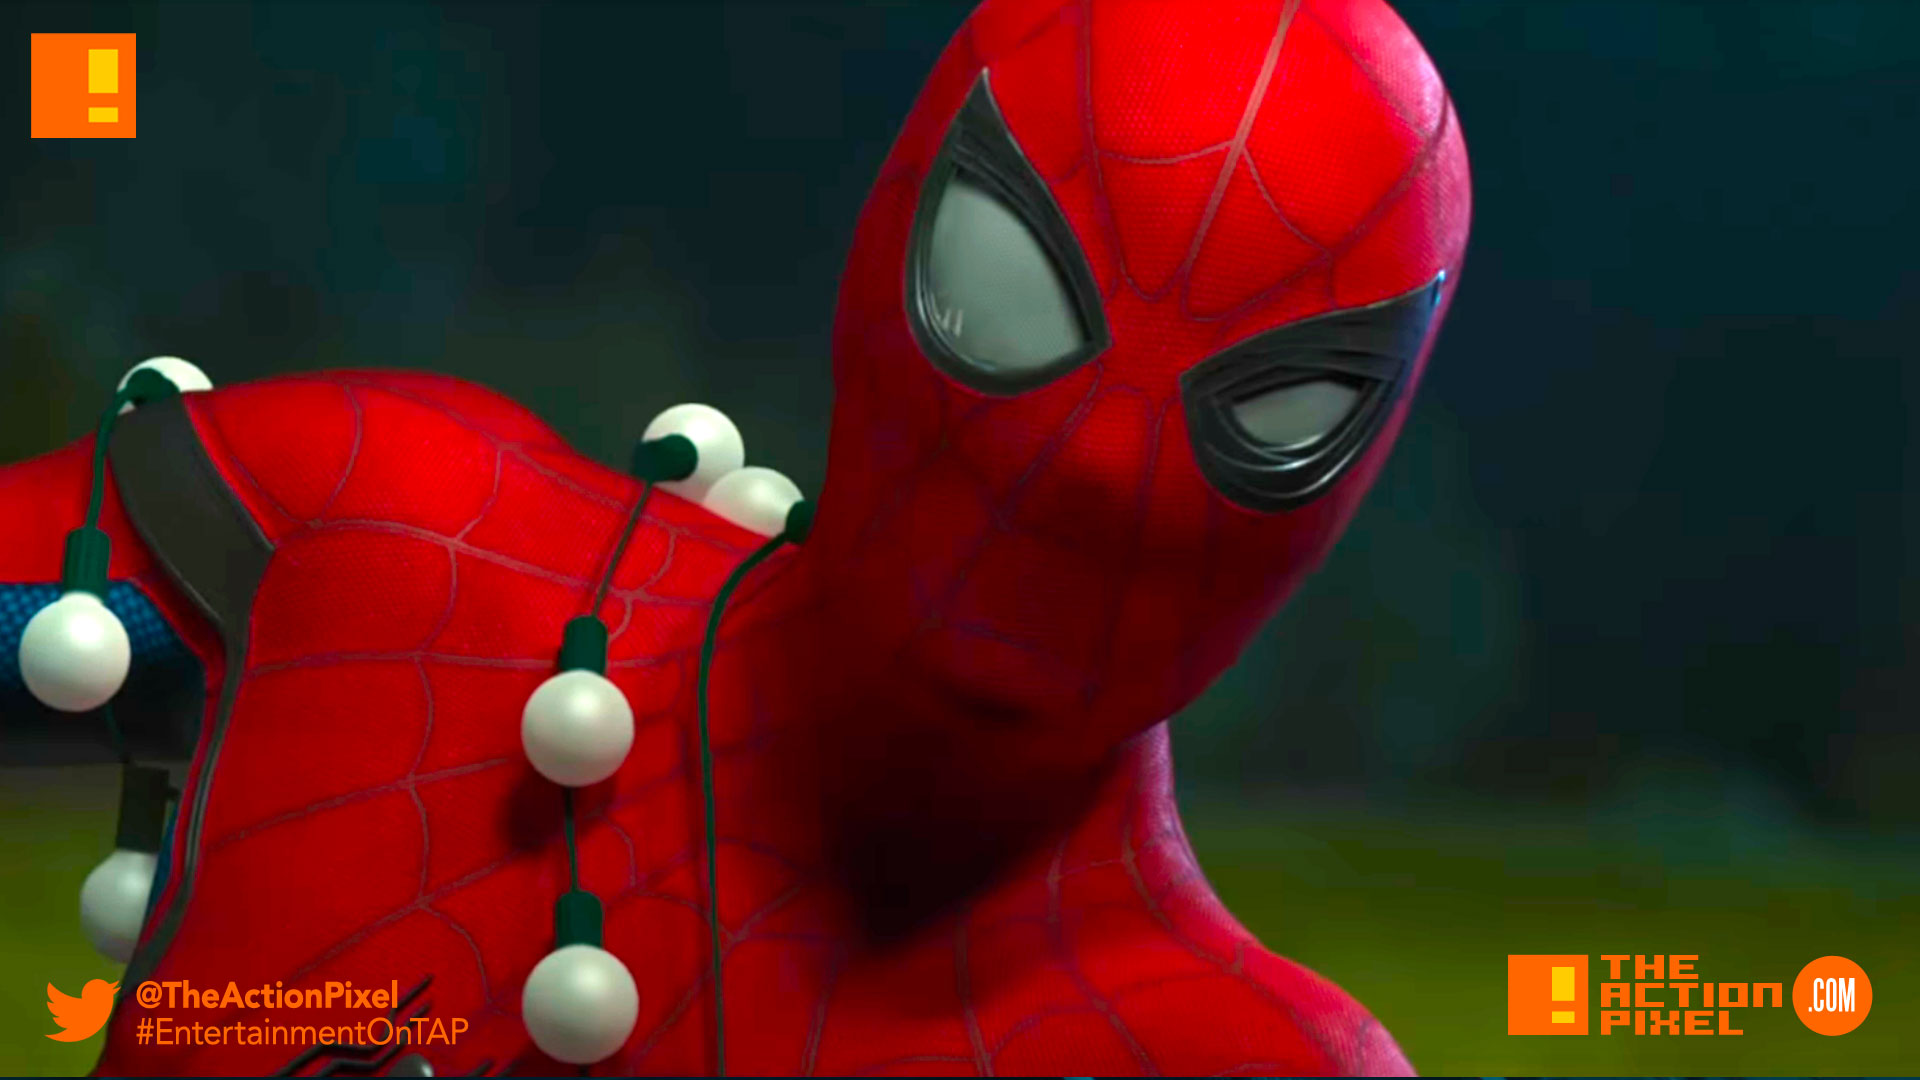 spiderman, poster spider-man: homecoming, spider-man, spiderman, homecoming, marvel, marvel comics, disney, marvel studios, sony, the action pixel, entertainment on tap, tom holland, images,vulture, trailer, trailer 3,